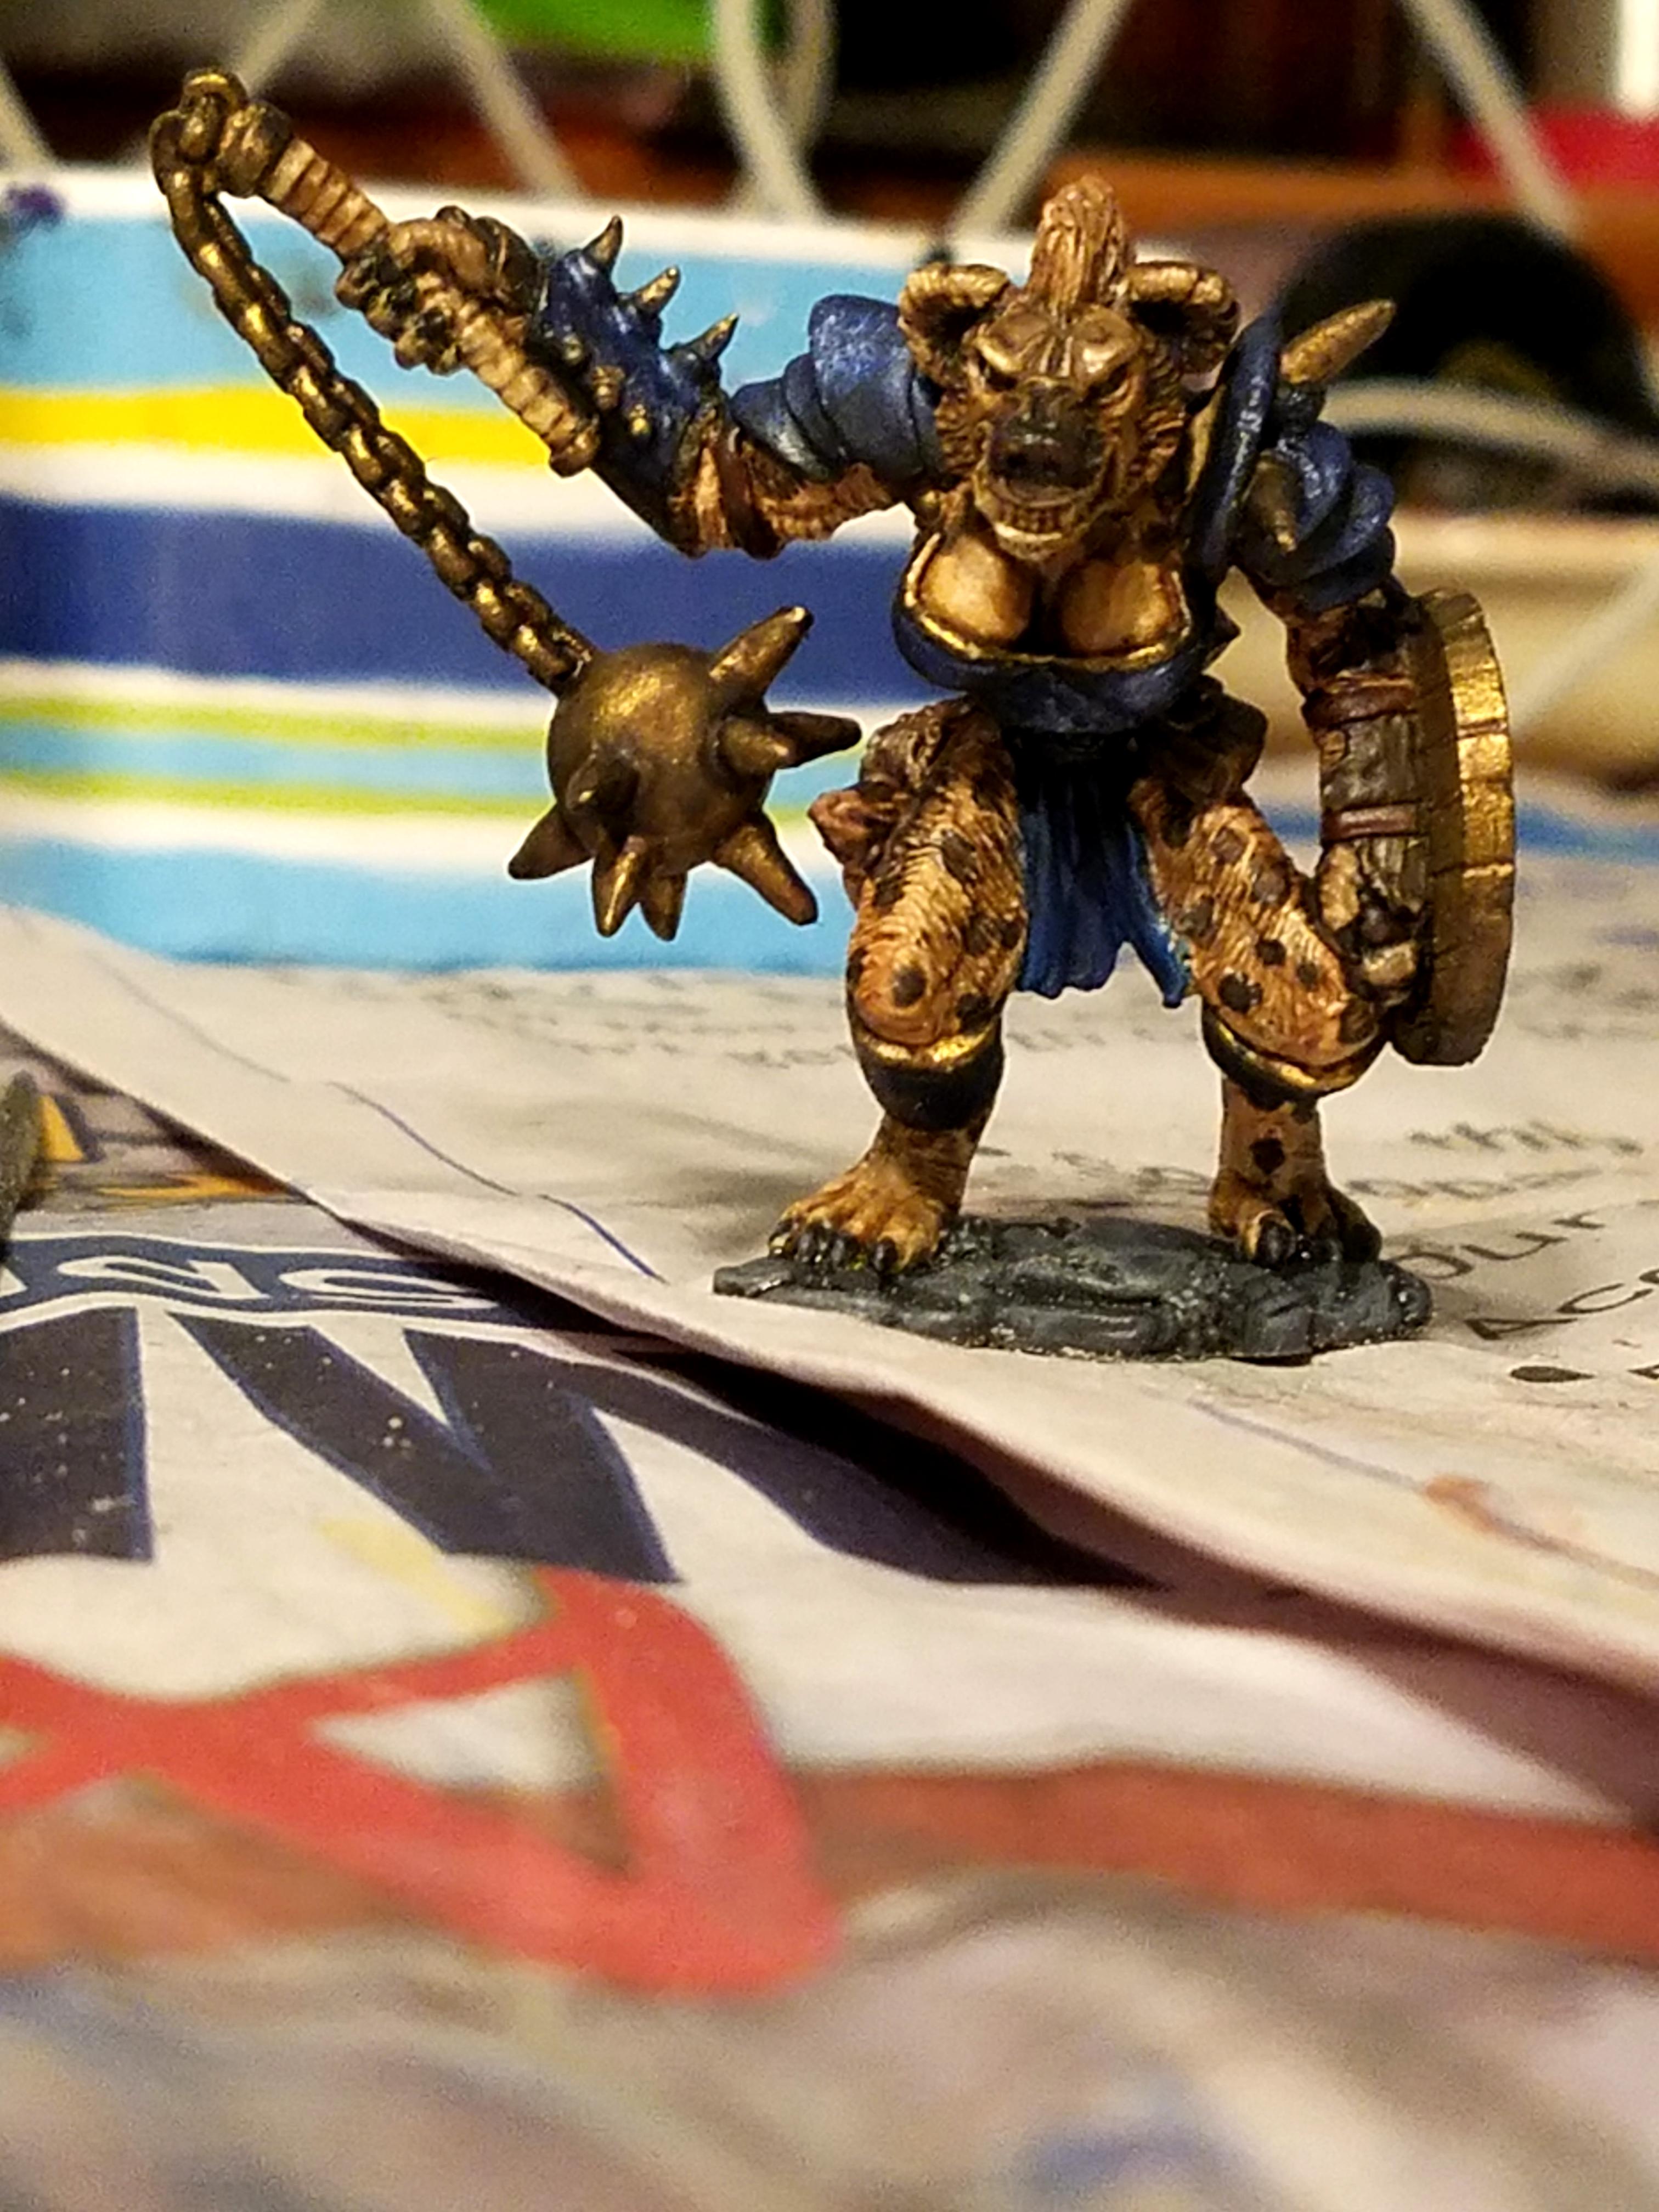 Blue Metallics, Cauliflower Base, Colored Metallics, Gnoll, Hyena, Layered Wash Painting, Mediocrity, Overly Busy Backgrounds, Oversized Flail, Reaper, Stone Themed Base, True Metallic Metals